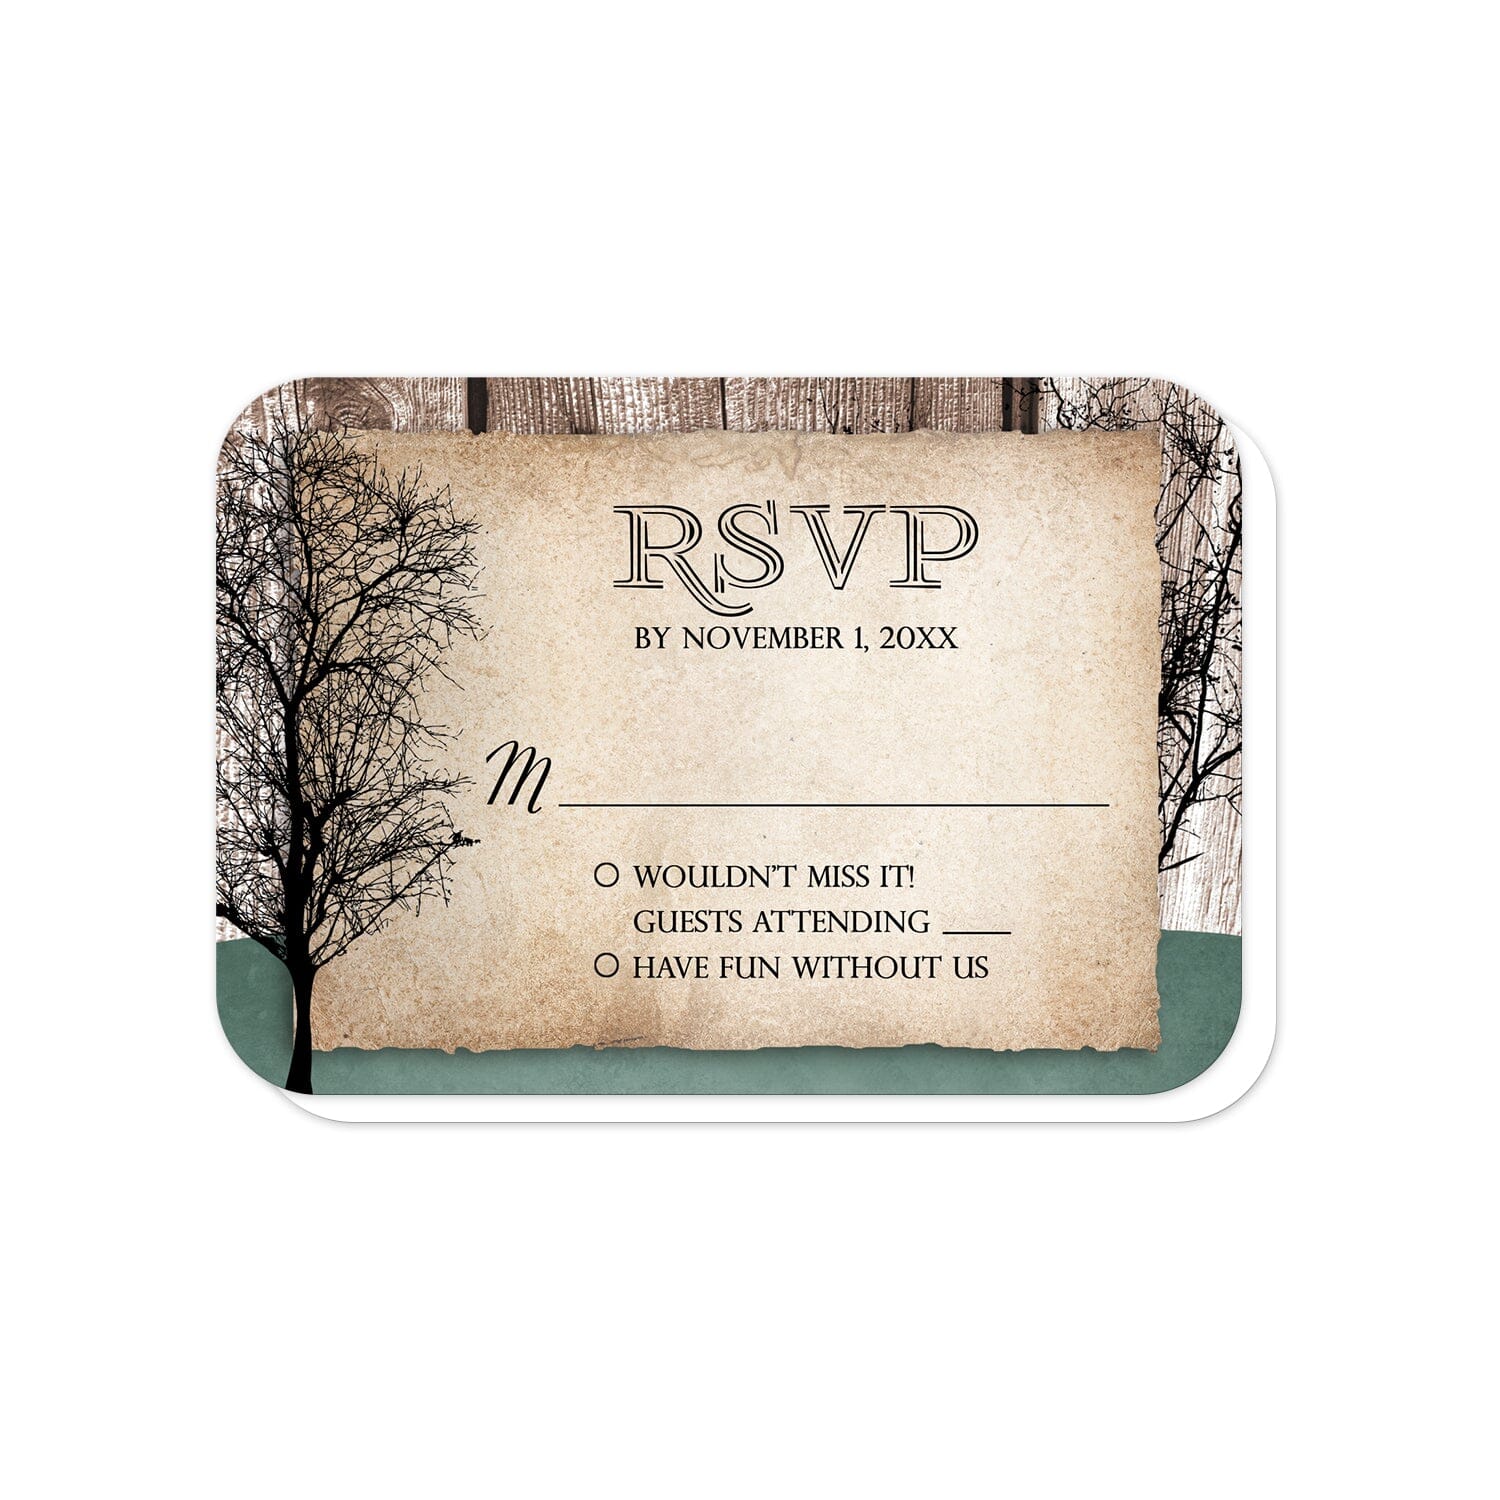 Rustic Woodsy Deer RSVP Cards (with rounded corners) at Artistically Invited. Rustic woodsy deer reception only invitations designed with silhouettes of a buck deer with antlers, a doe, and winter trees over a wood brown background and a faded hunter green design along the bottom. Your personalized RSVP date details are custom printed in black over a tattered rustic paper illustration between the deer.